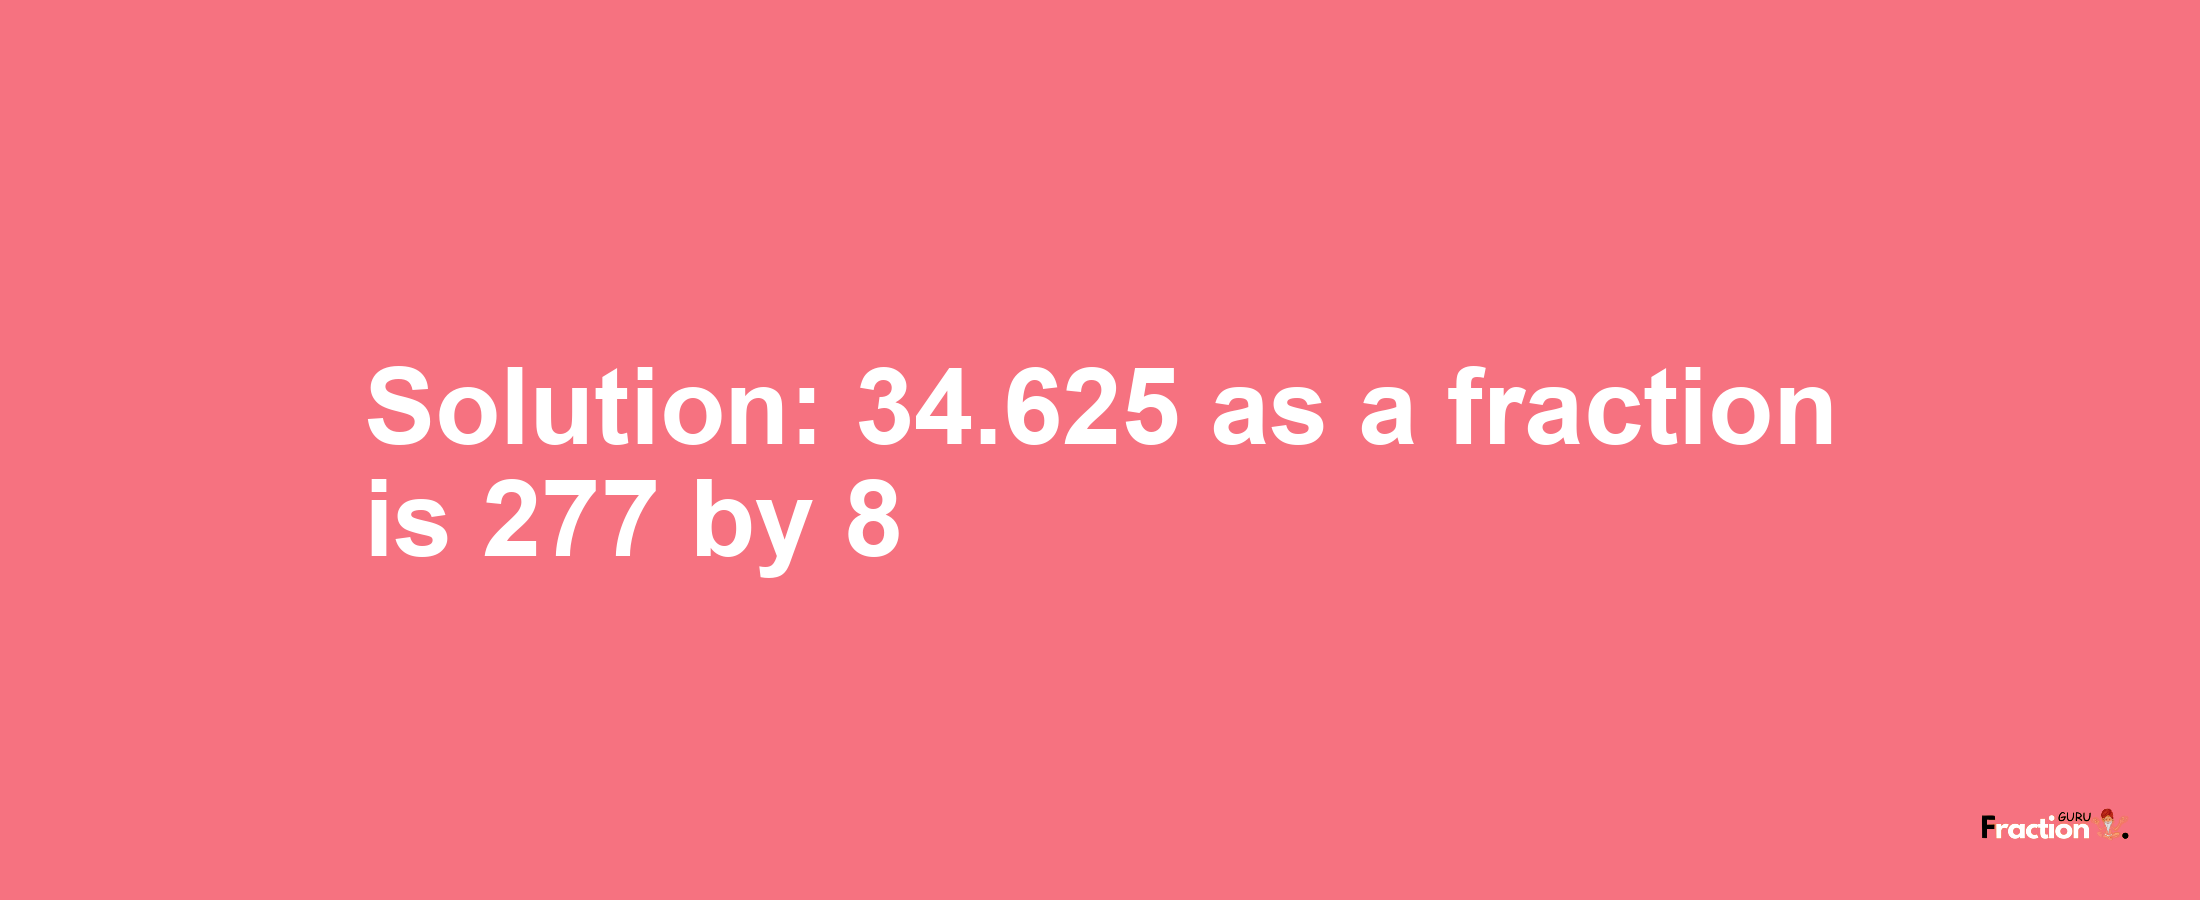 Solution:34.625 as a fraction is 277/8